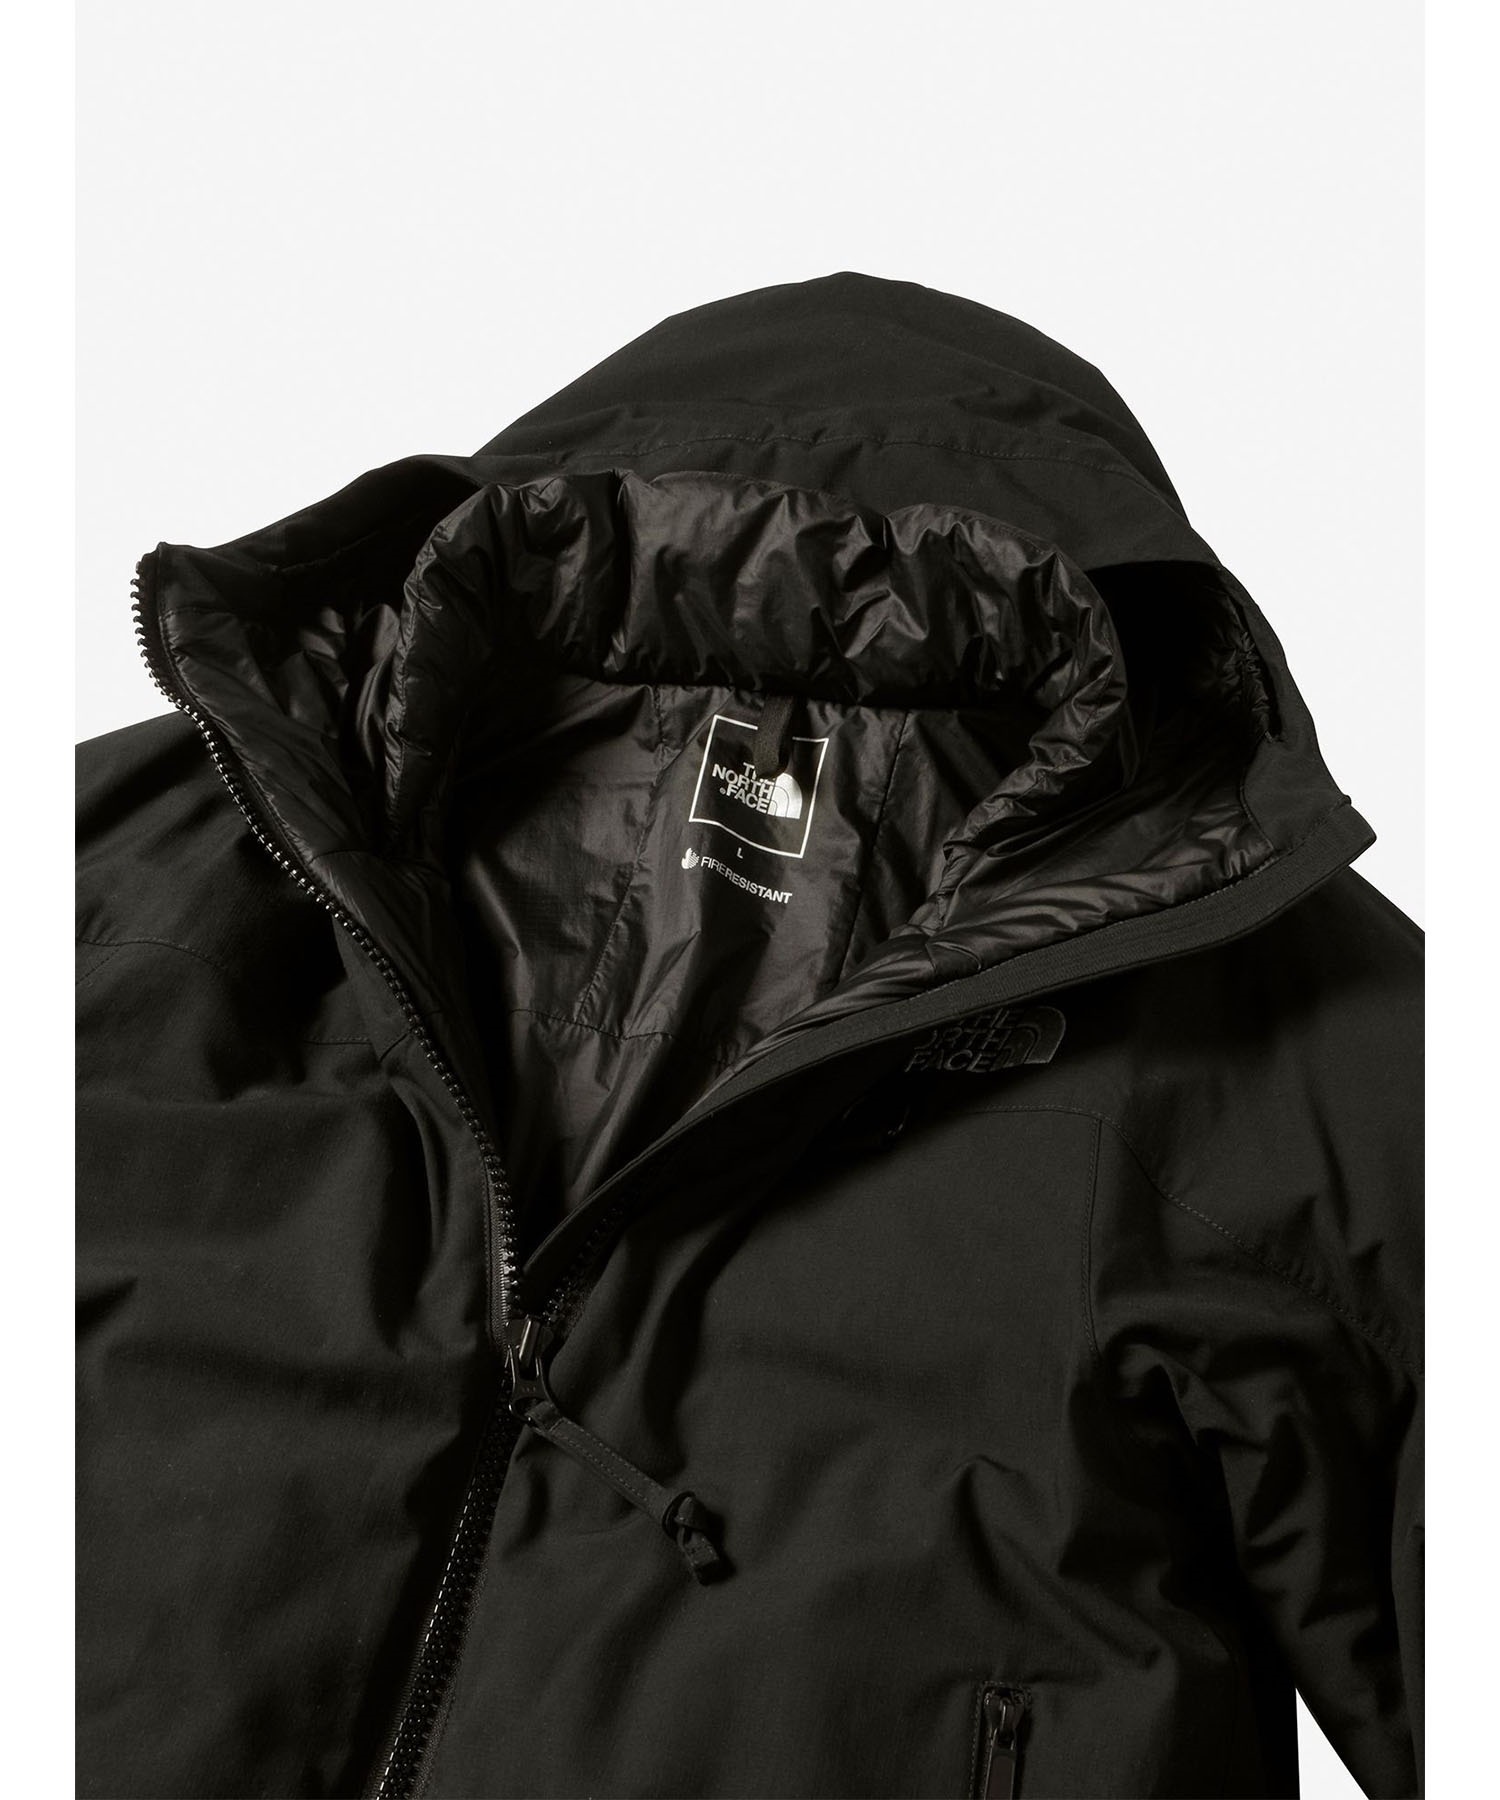 THE NORTH FACE/ノース・フェイス FIREFLY INSULATED PARKA メンズ